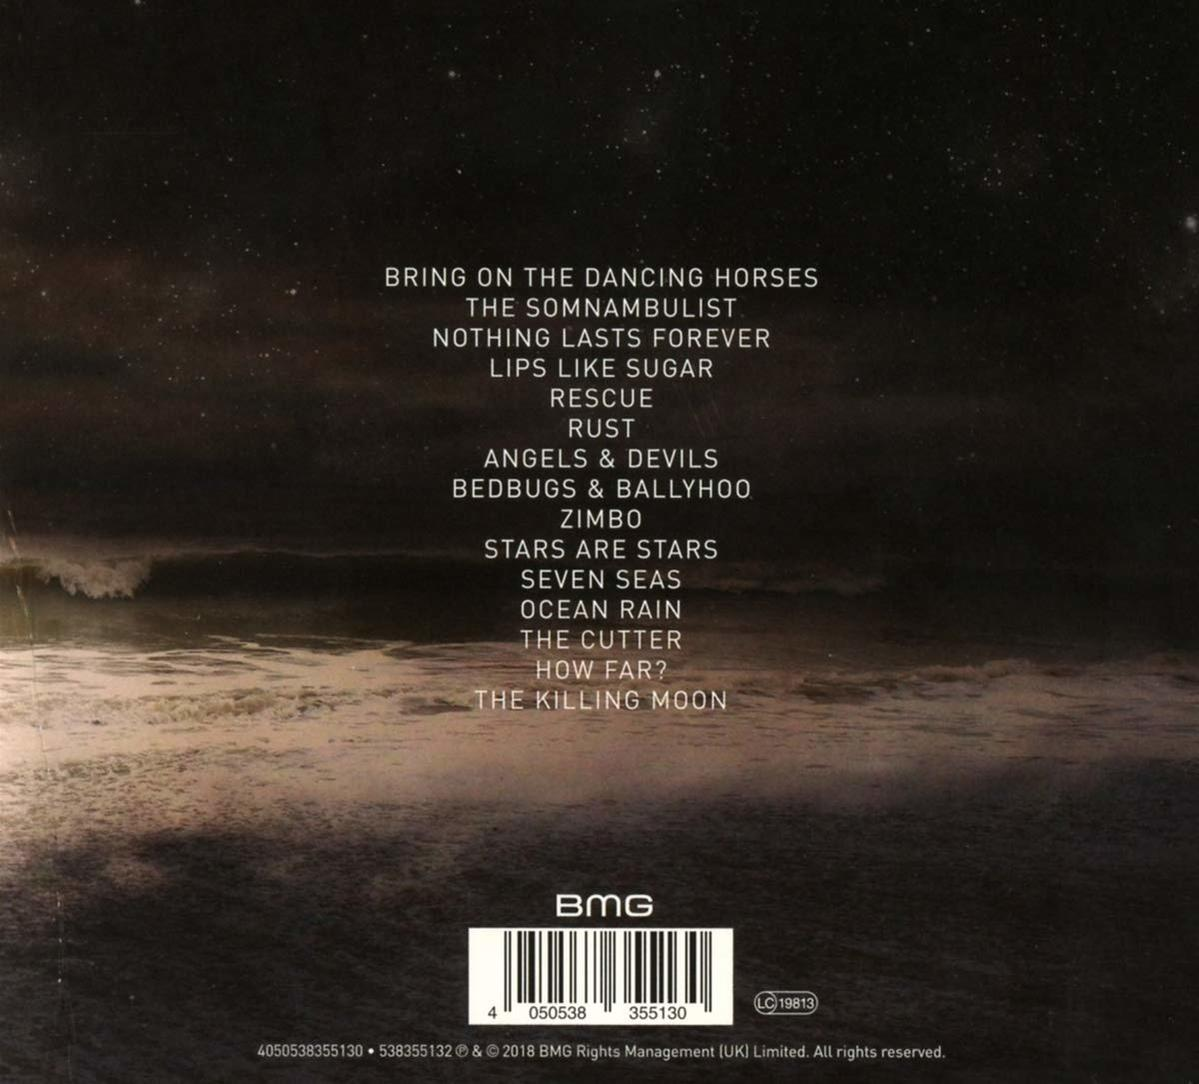 Moon Echo & The Oceans The (CD) - The & Bunnymen - Stars,The